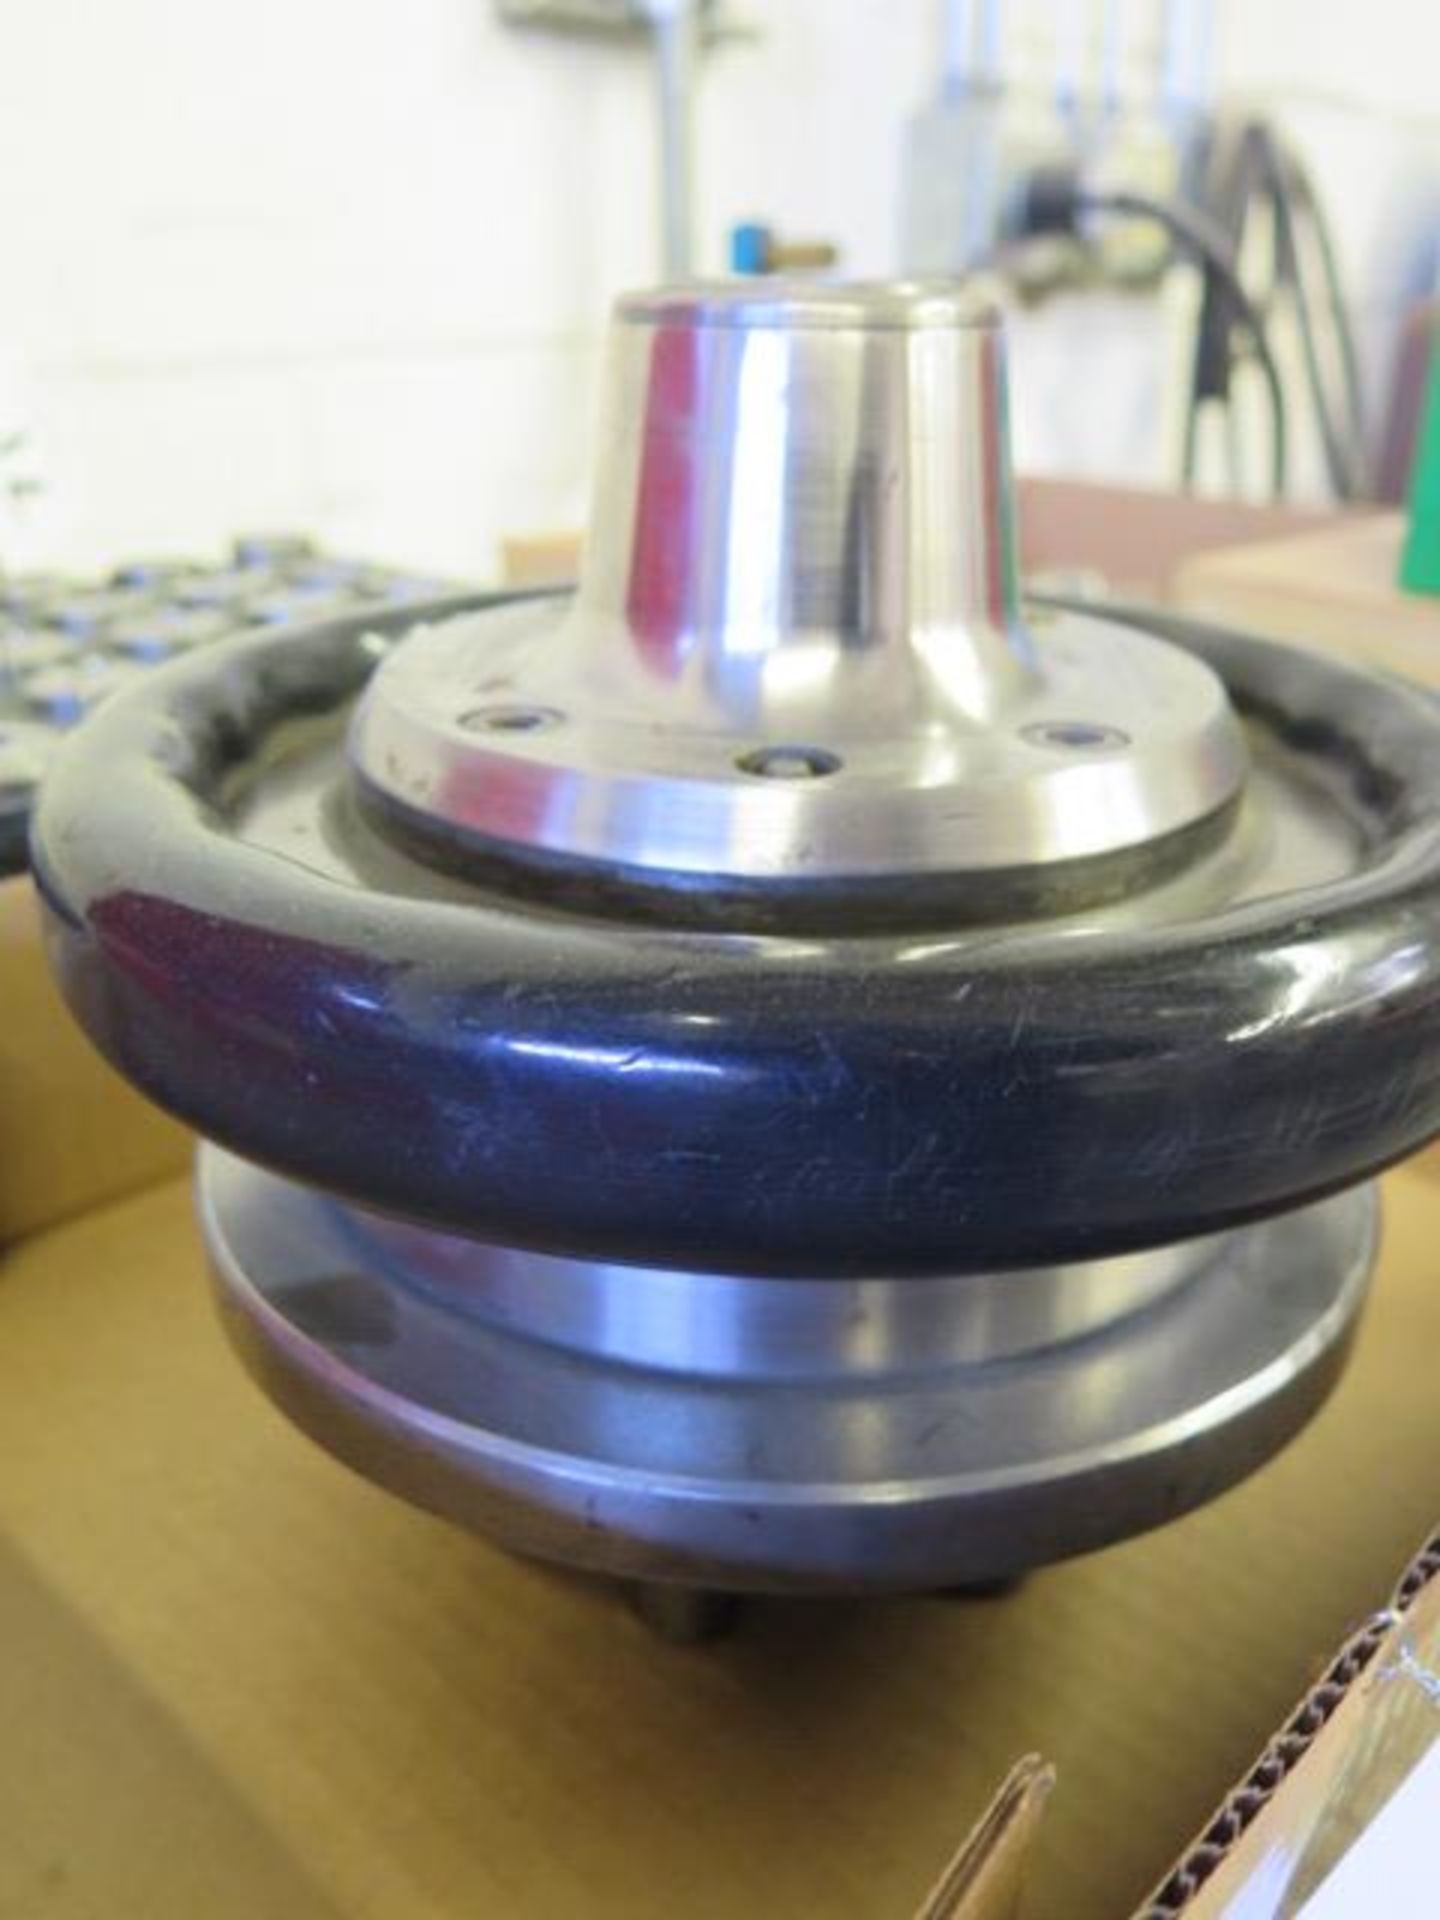 Hardinge 5C Speed Chuck (SOLD AS-IS - NO WARRANTY) - Image 3 of 6